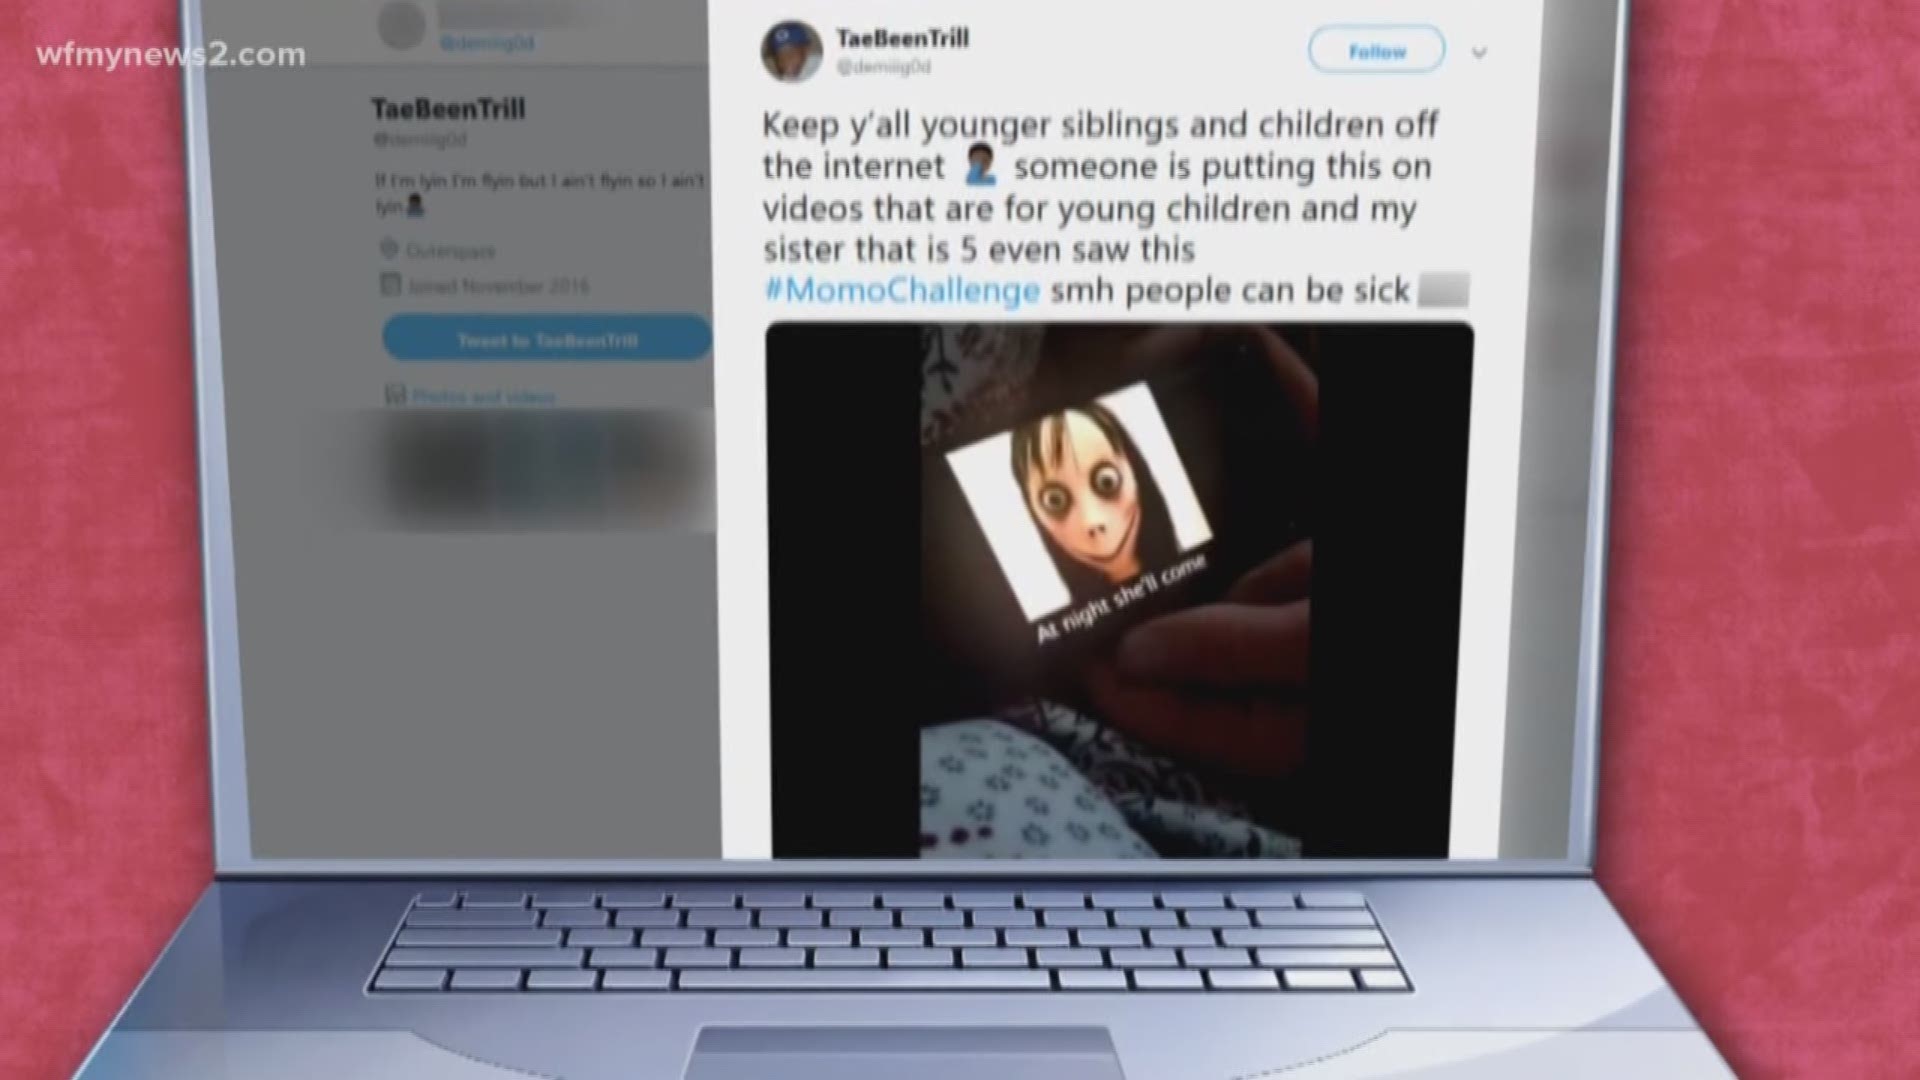 We take a look at the frightening viral and violent youtube trend and how to talk to your kids about it